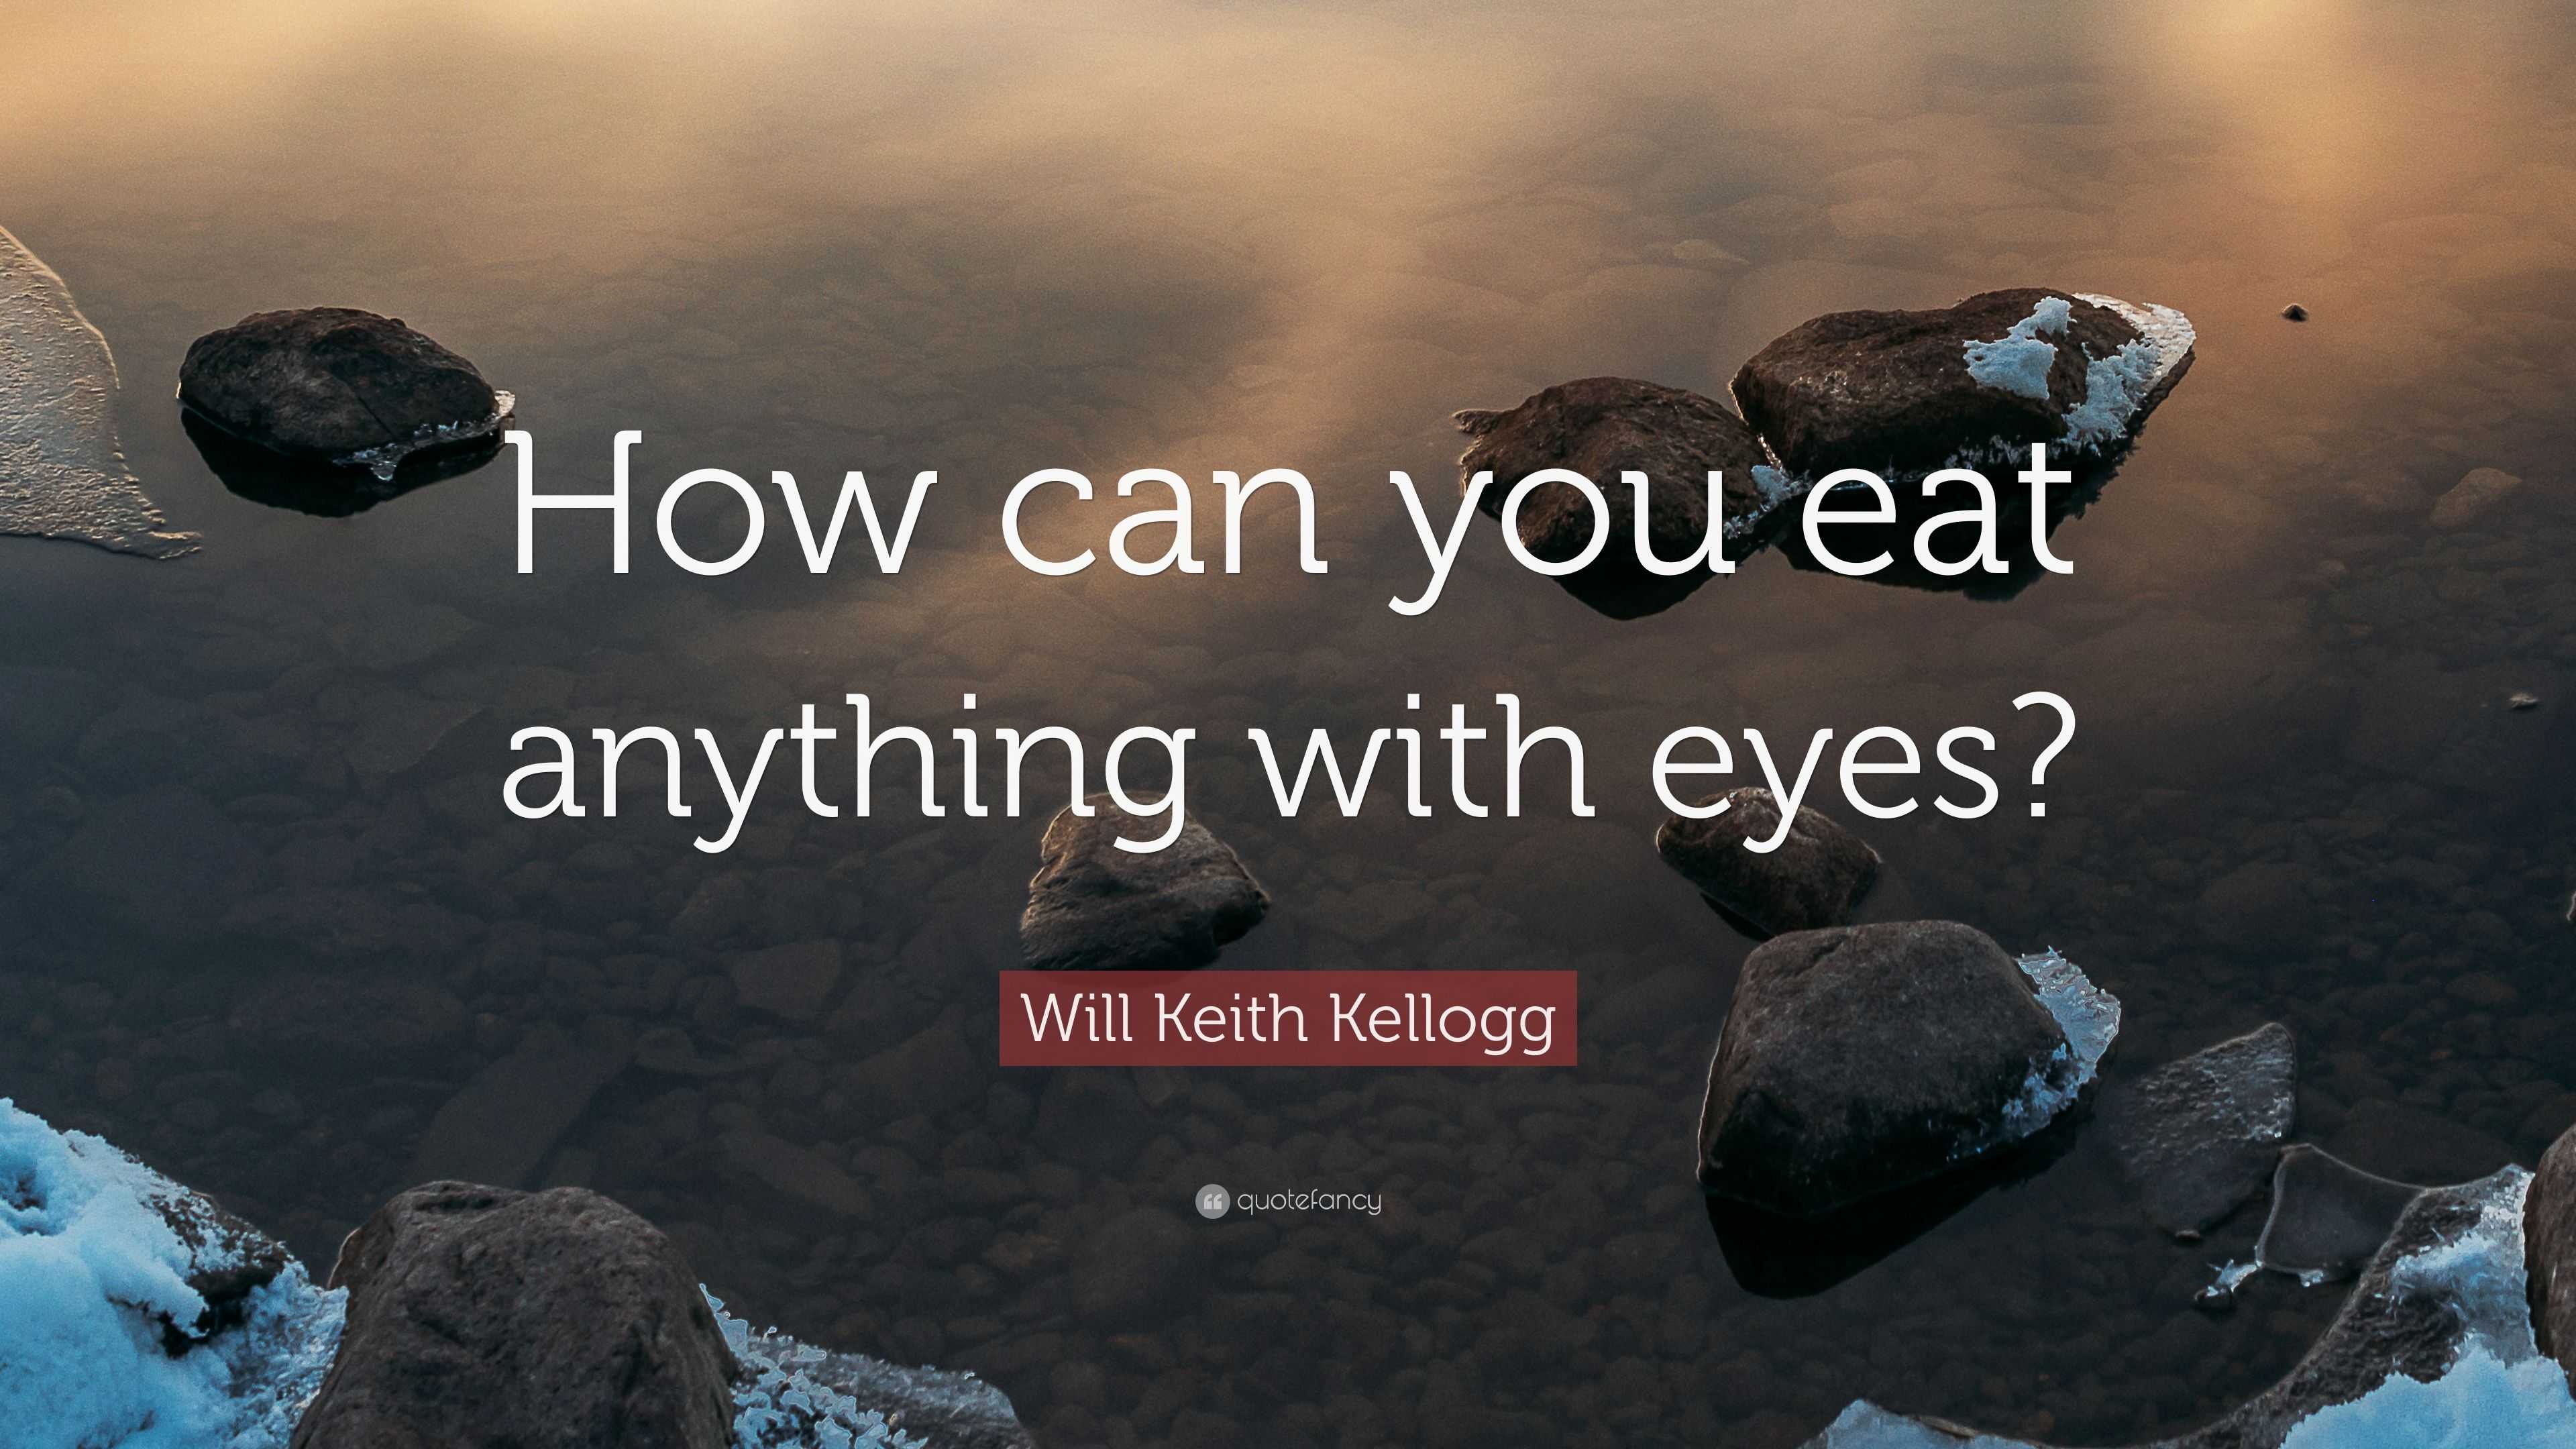 Will Keith Kellogg Quote: “How can you eat anything with eyes?”